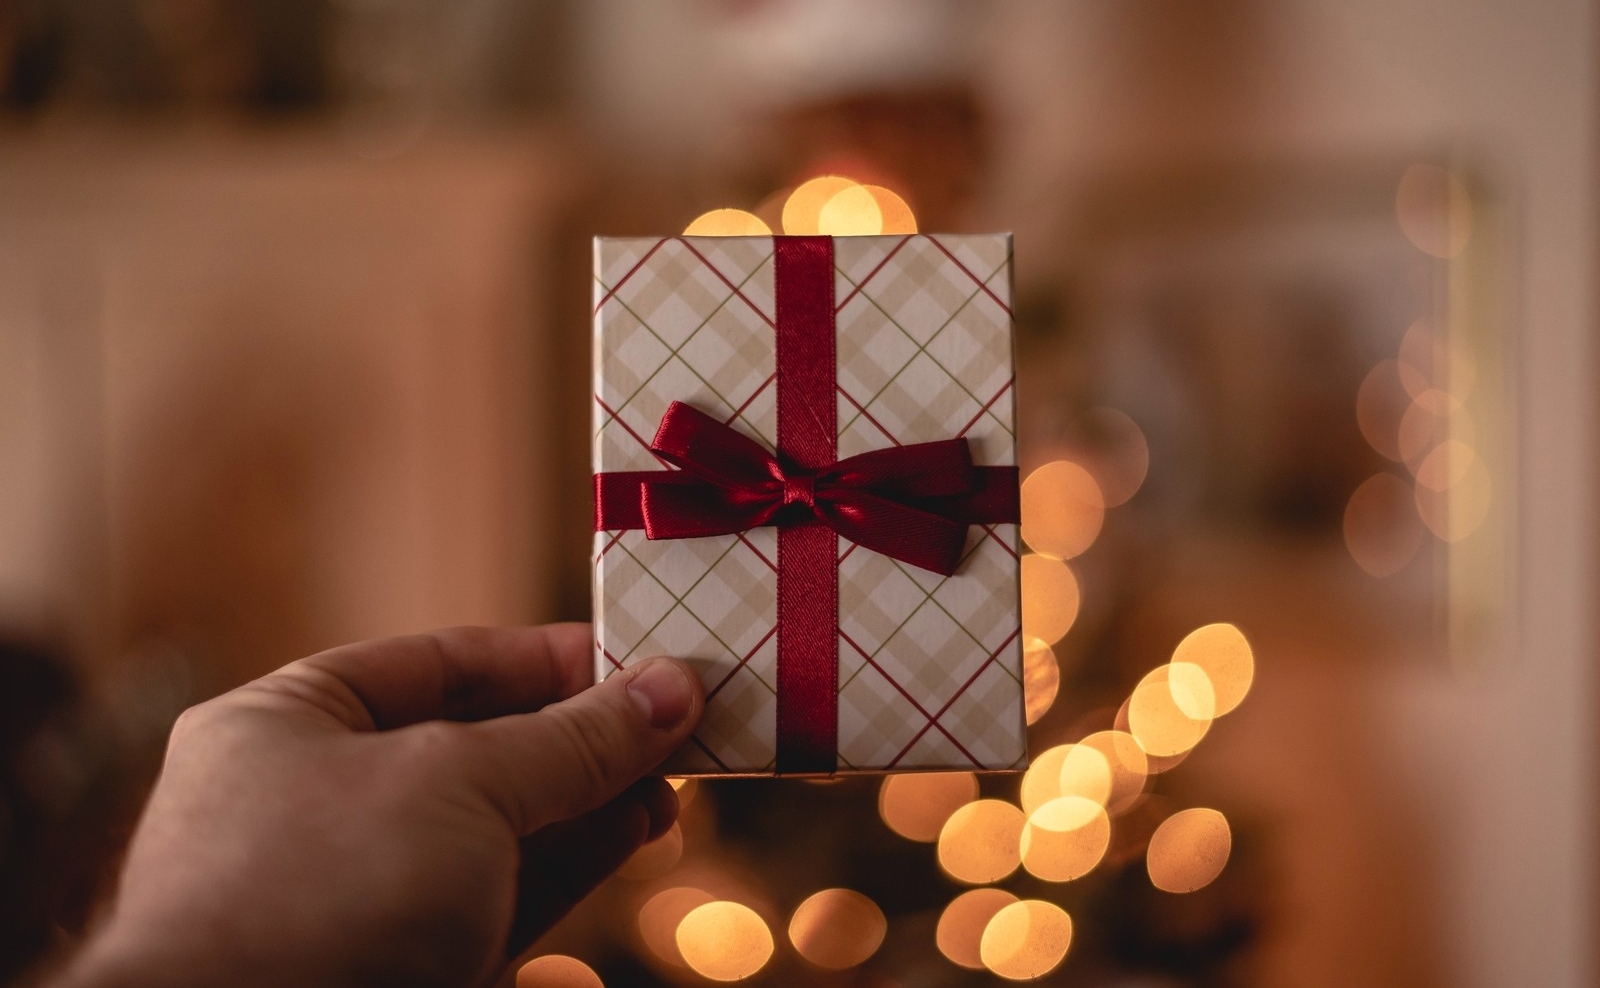 Image of a hand holding a small, square gift wrapped in red ribbon